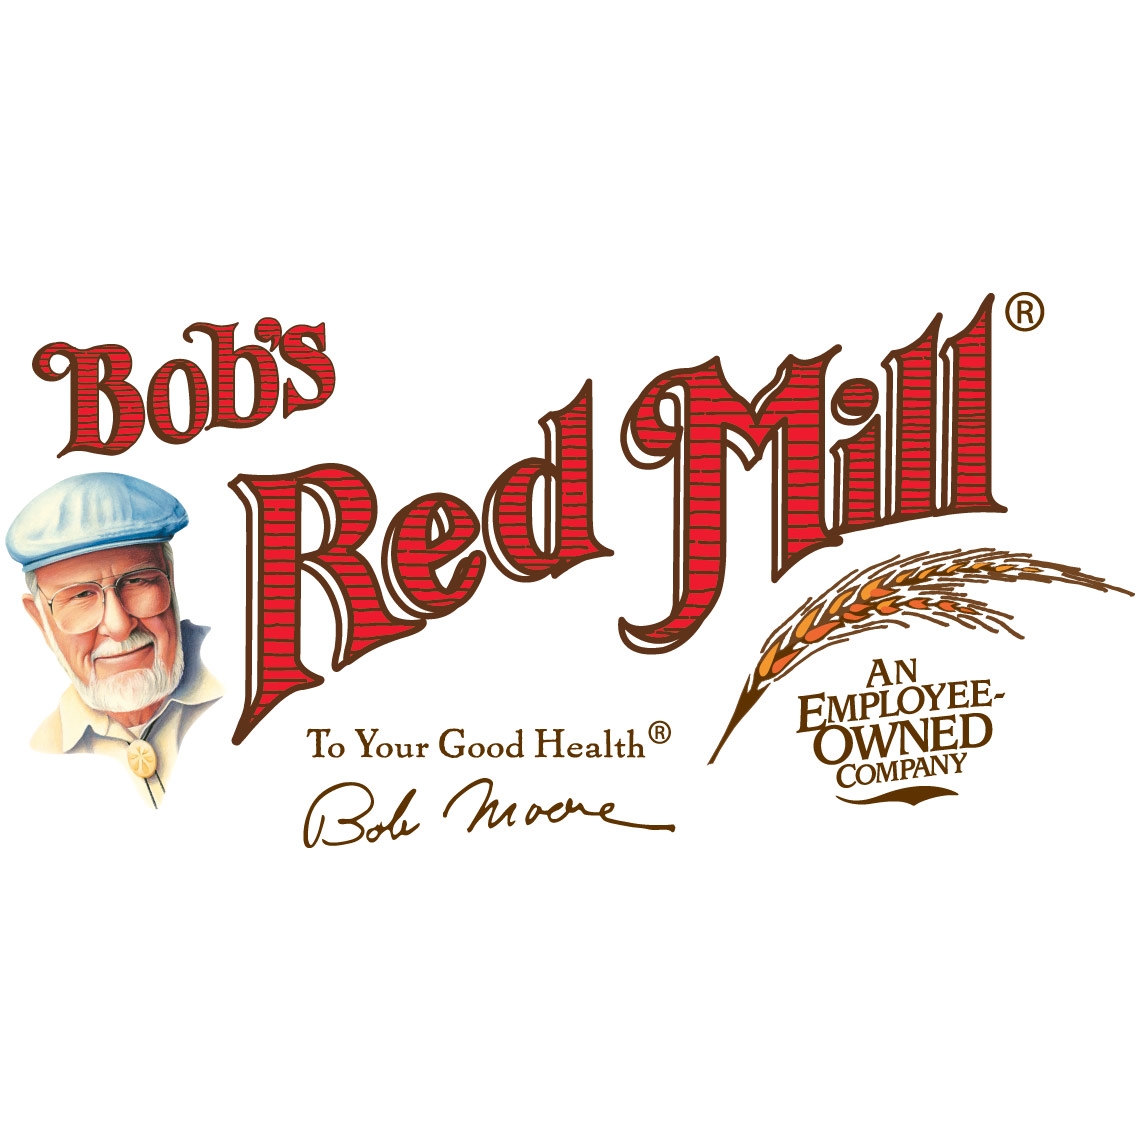 Gluten Free Rolled Oats :: Bob's Red Mill Natural Foods